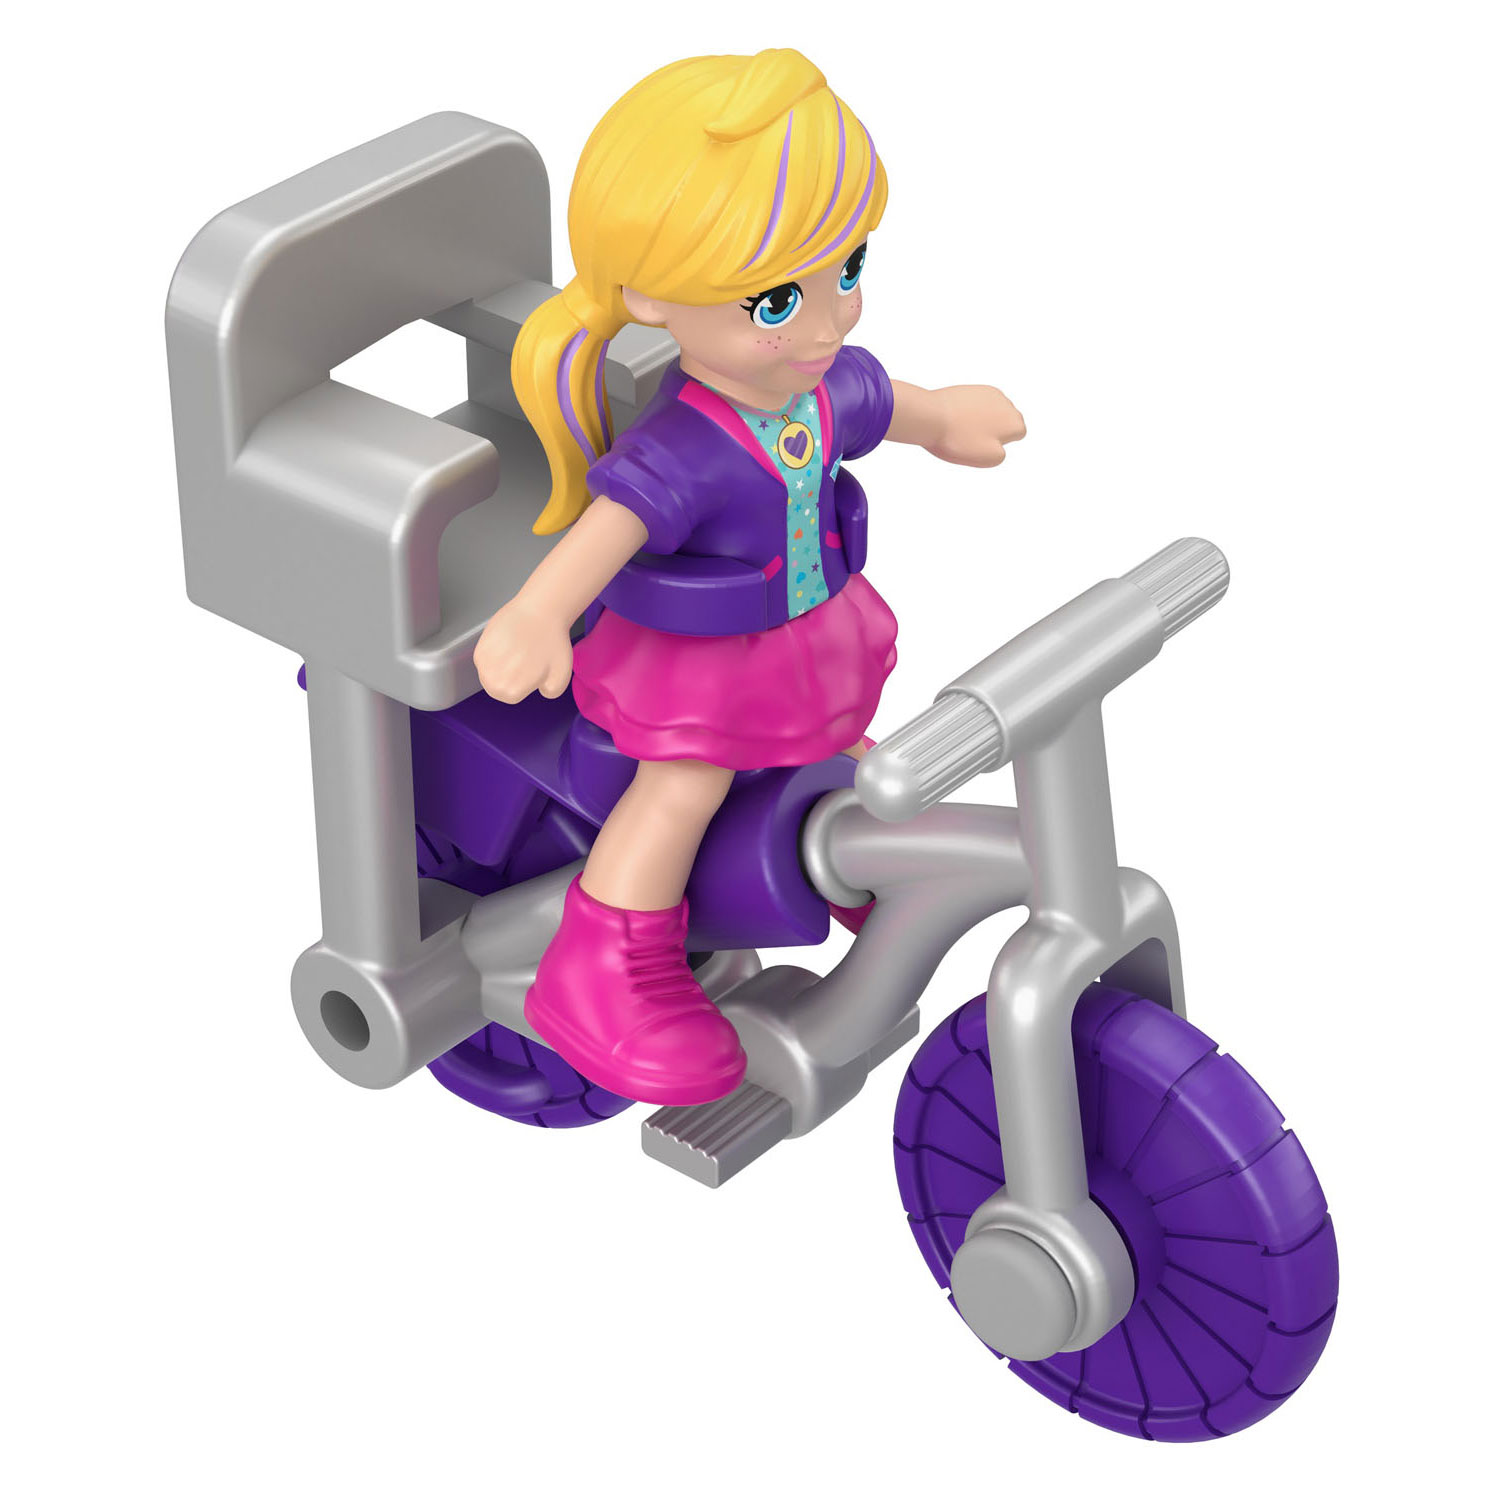 7 of the Most Valuable Polly Pocket Toys From the '90s and Beyond